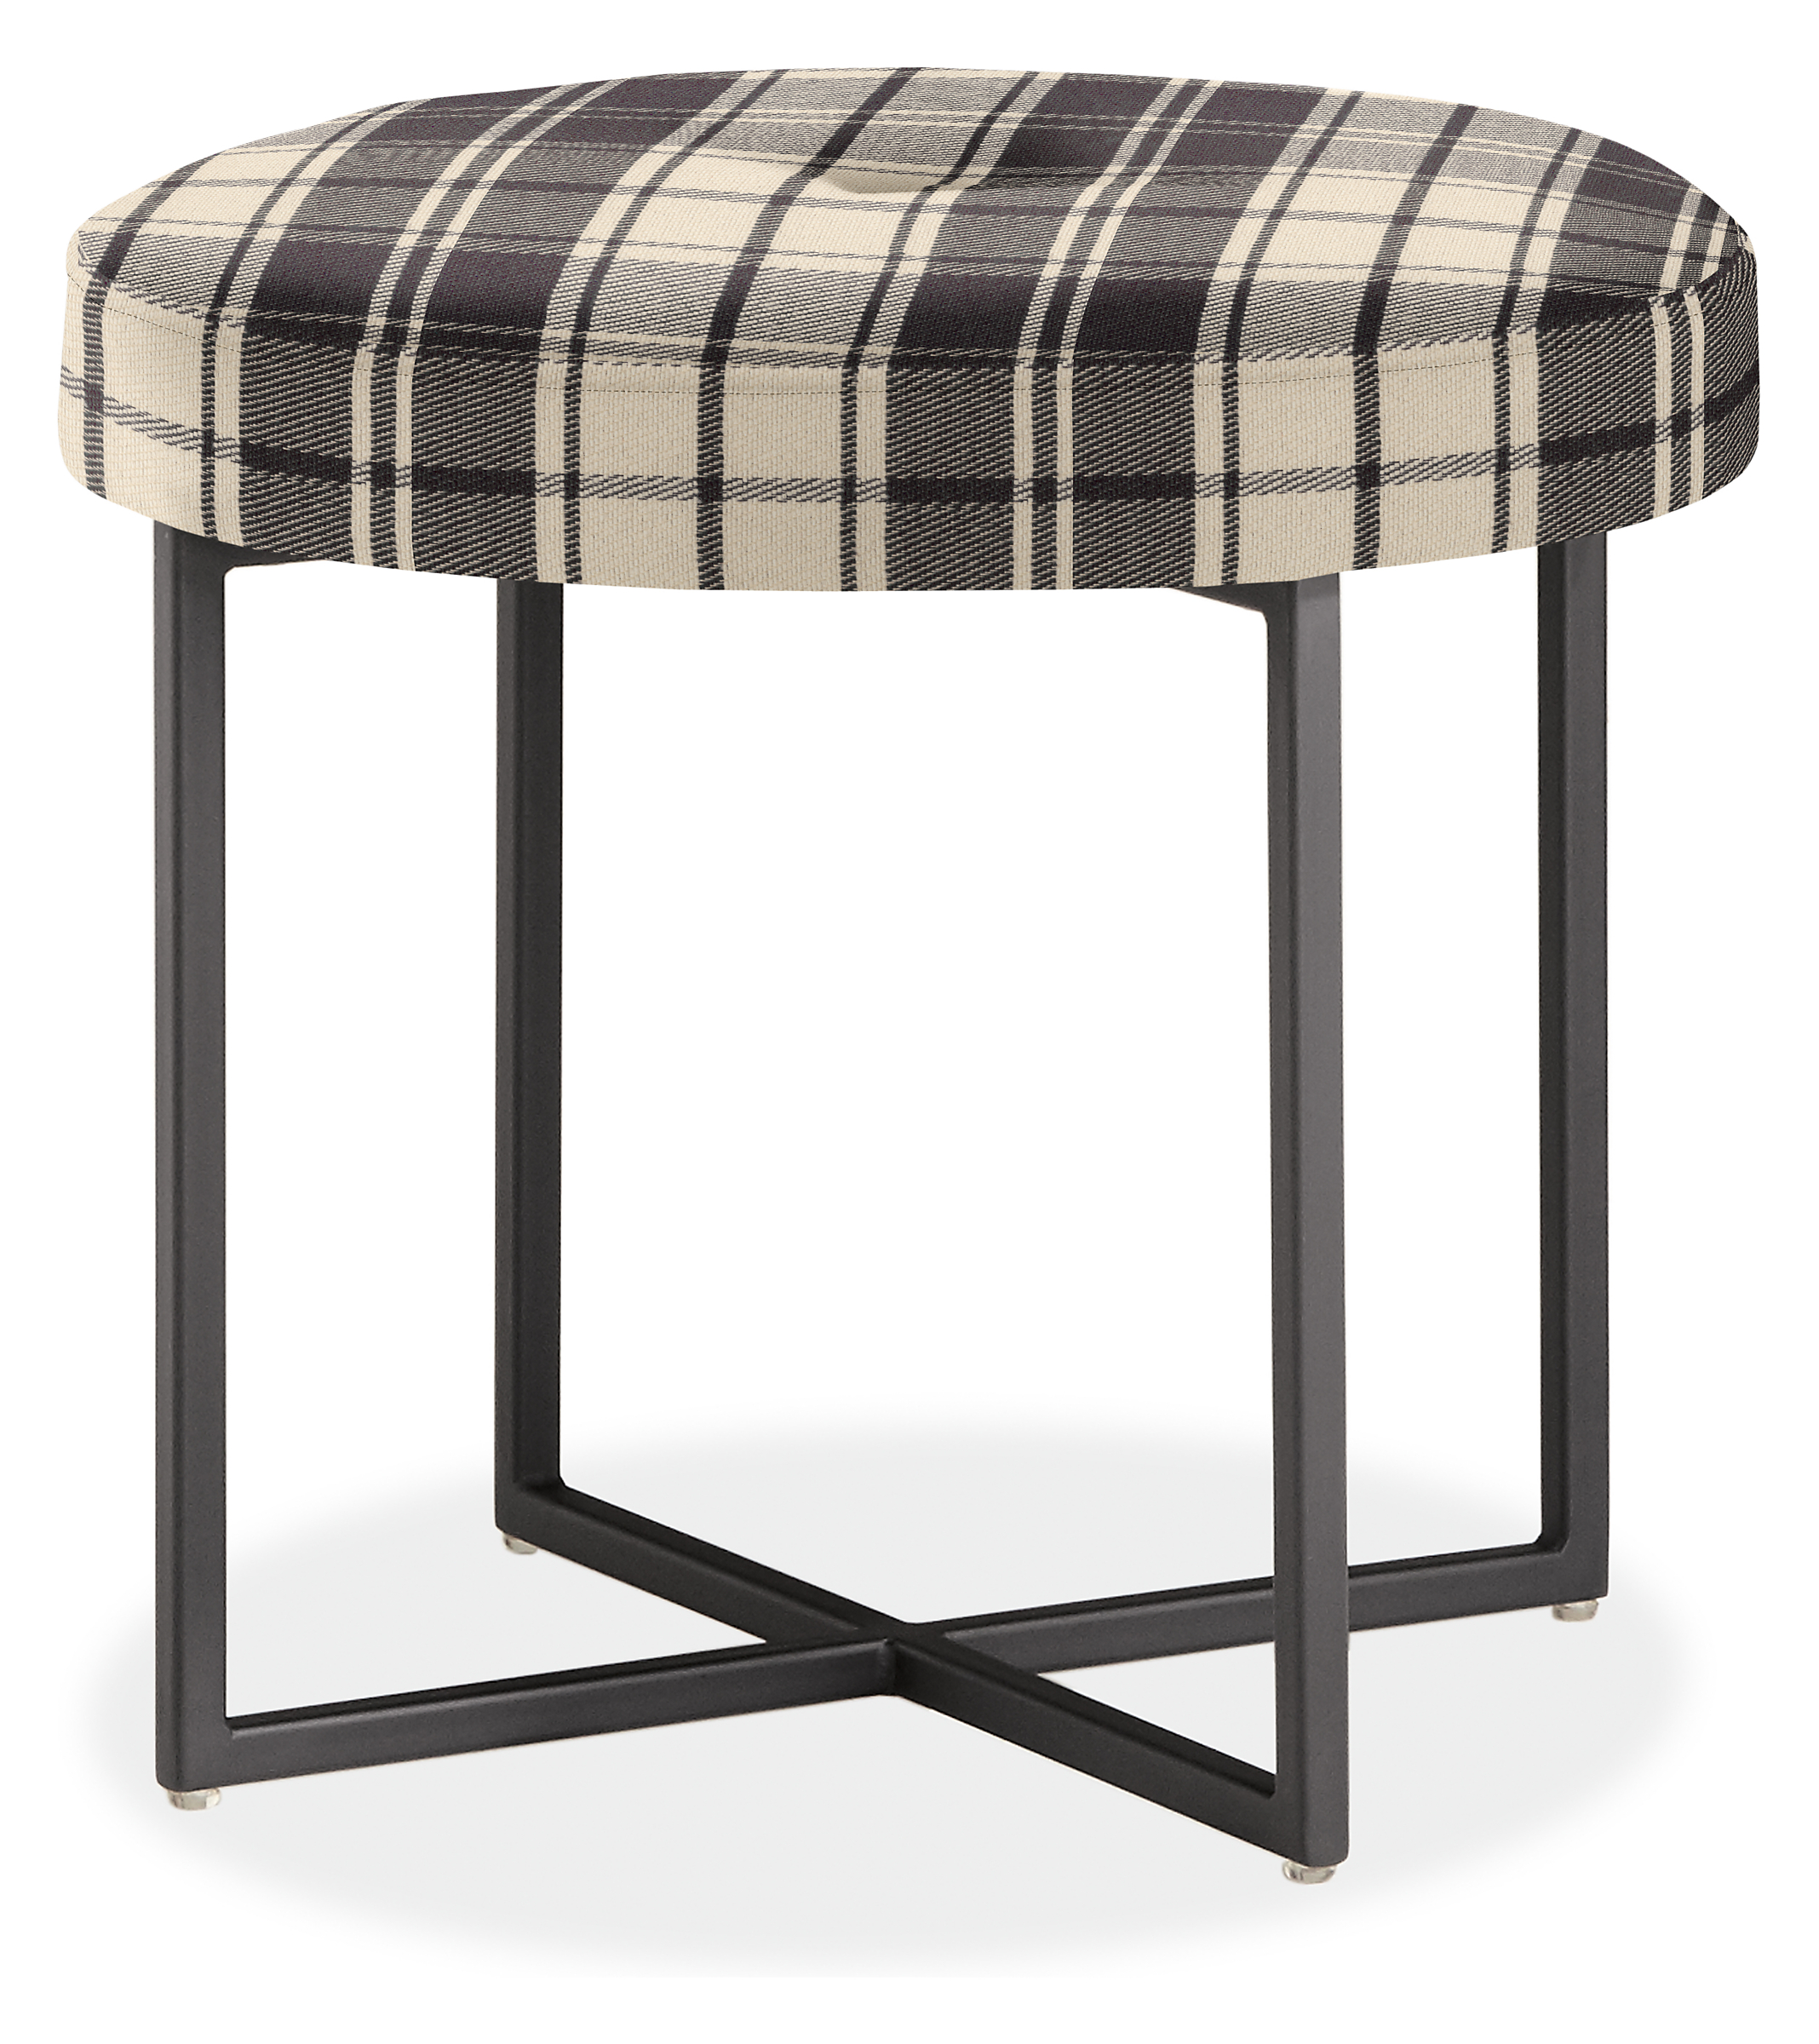 Sidney 18 diam Ottoman in Galway Ebony with Graphite Base